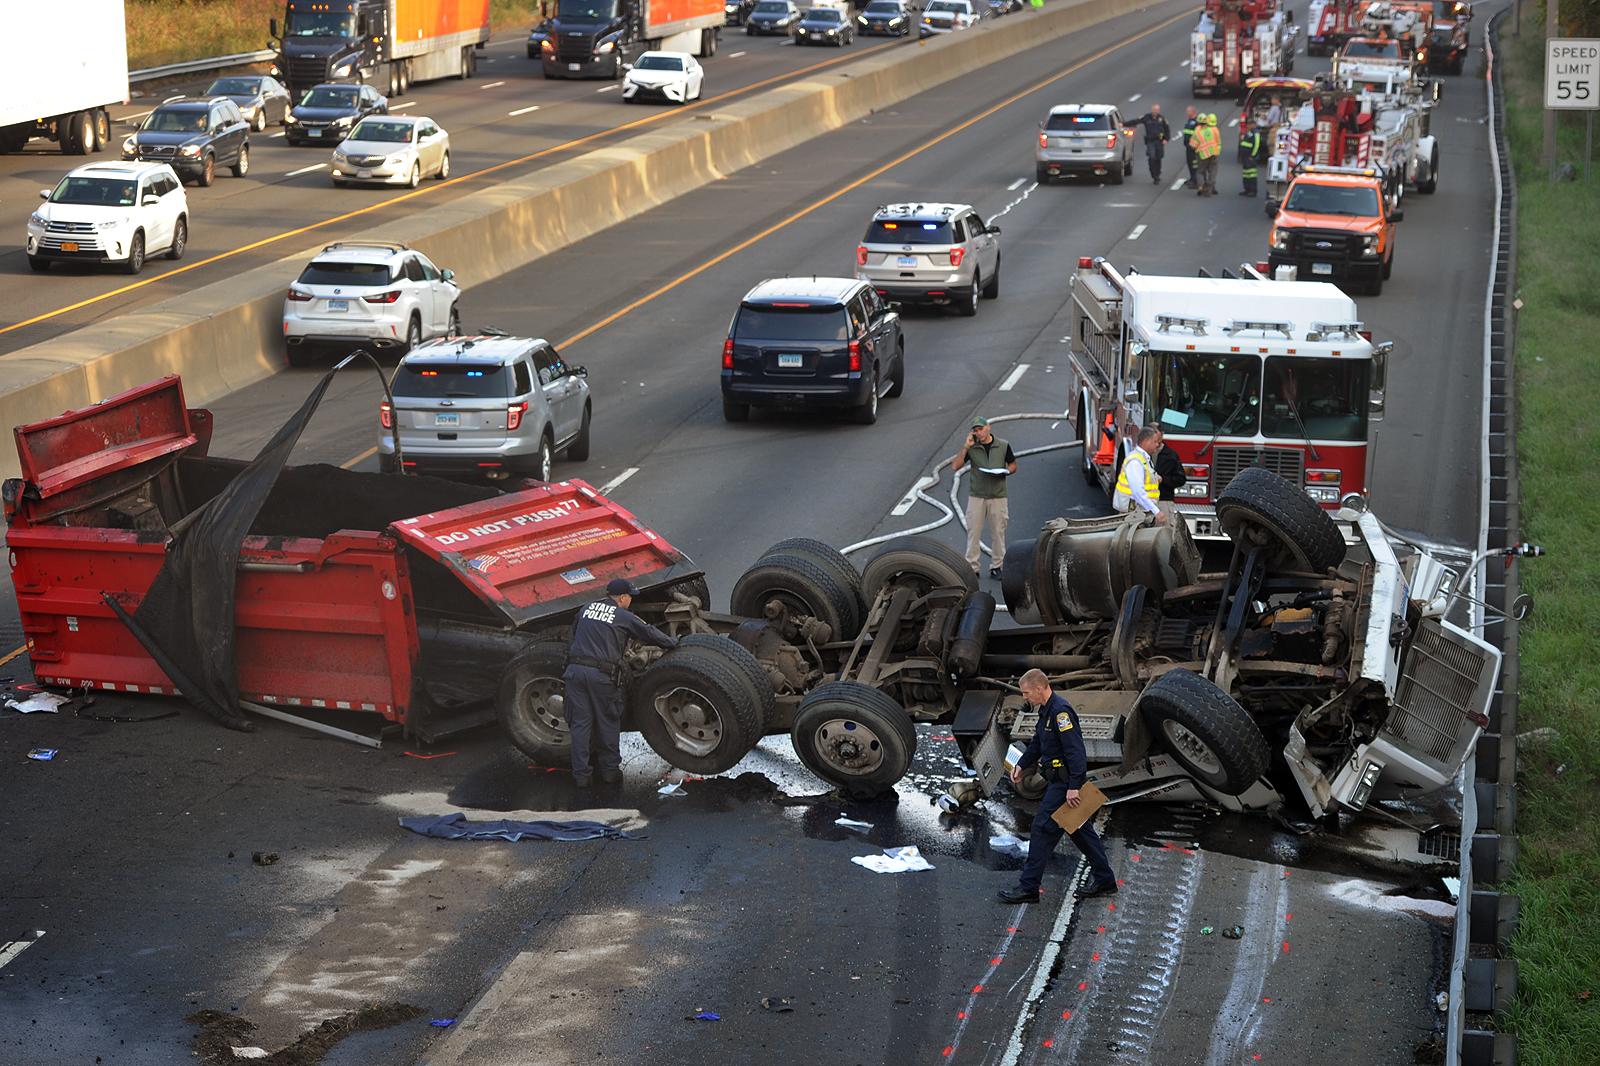 Fatal crash shut down I-95 in Milford for roughly 7 hours - Connecticut Post1600 x 1066